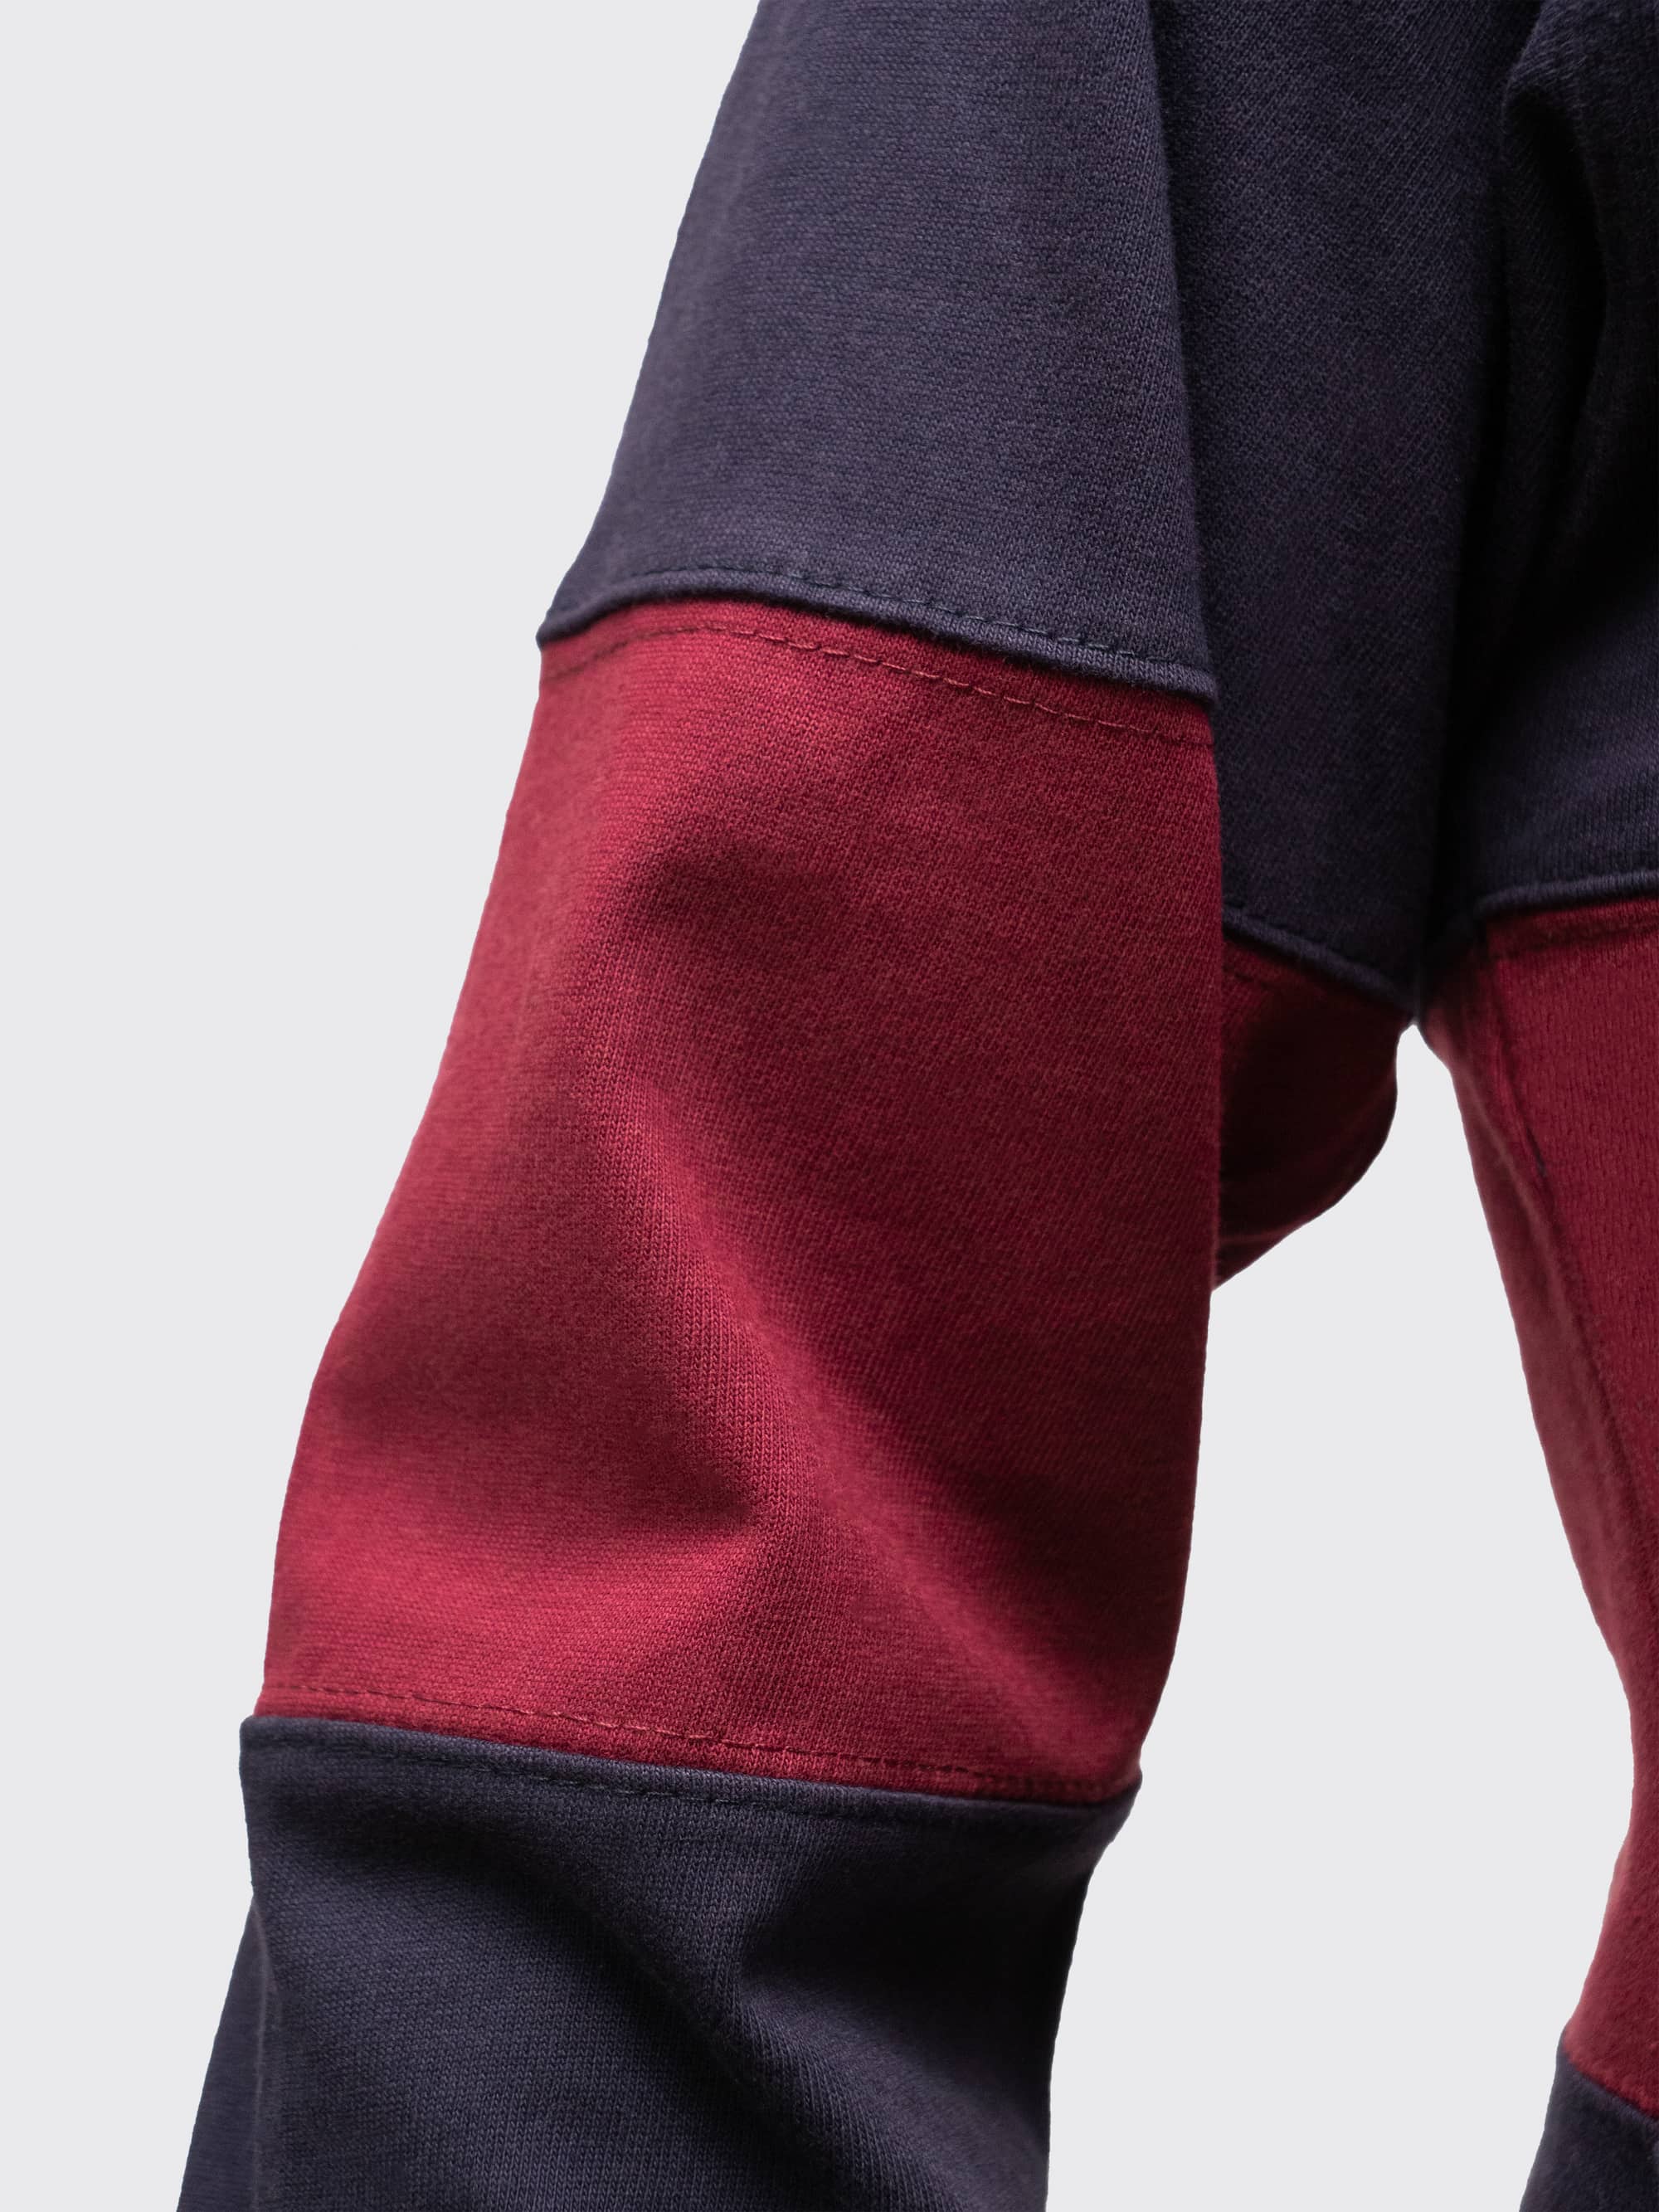 Heavyweight navy and burgundy fabric, with twin-needle stitch detail